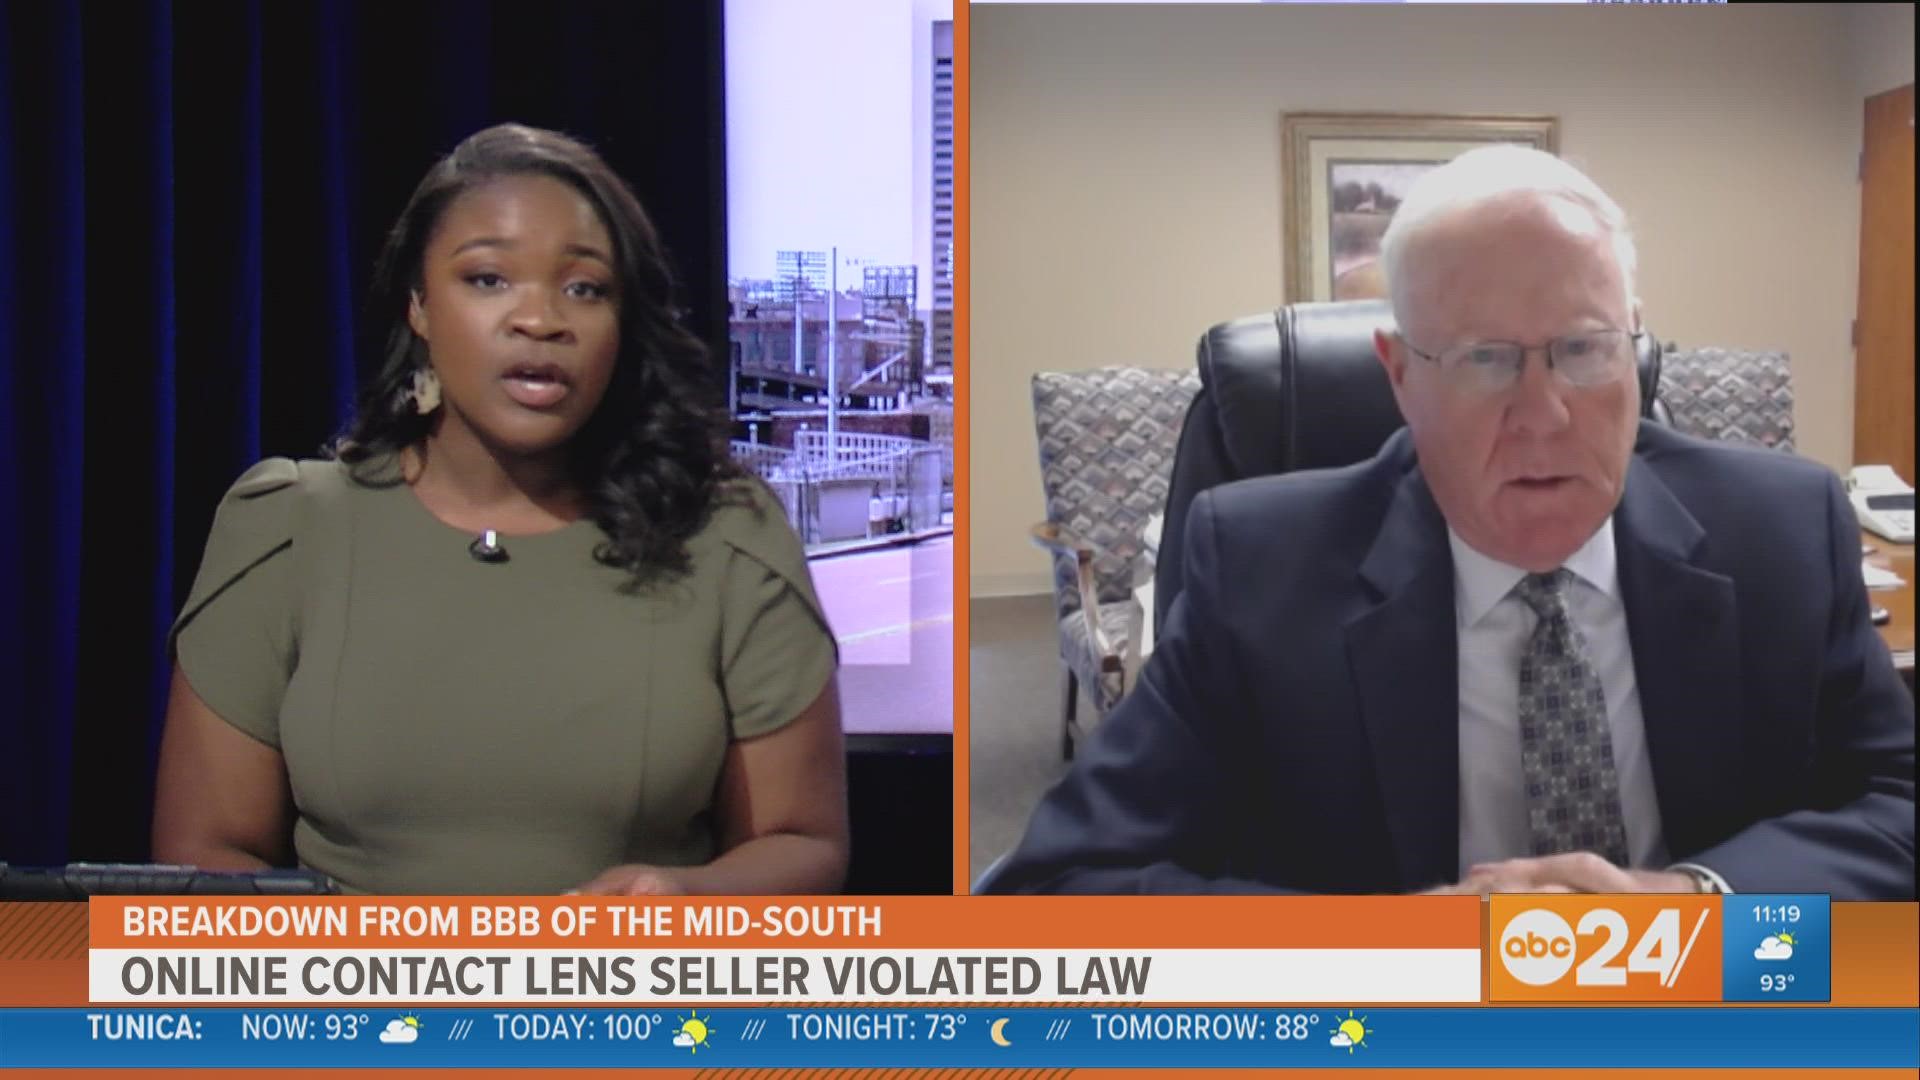 ABC24 spoke with Randy Hutchinson from the Better Business Bureau of the Mid-South (BBB) about the laws around the sale of contacts.